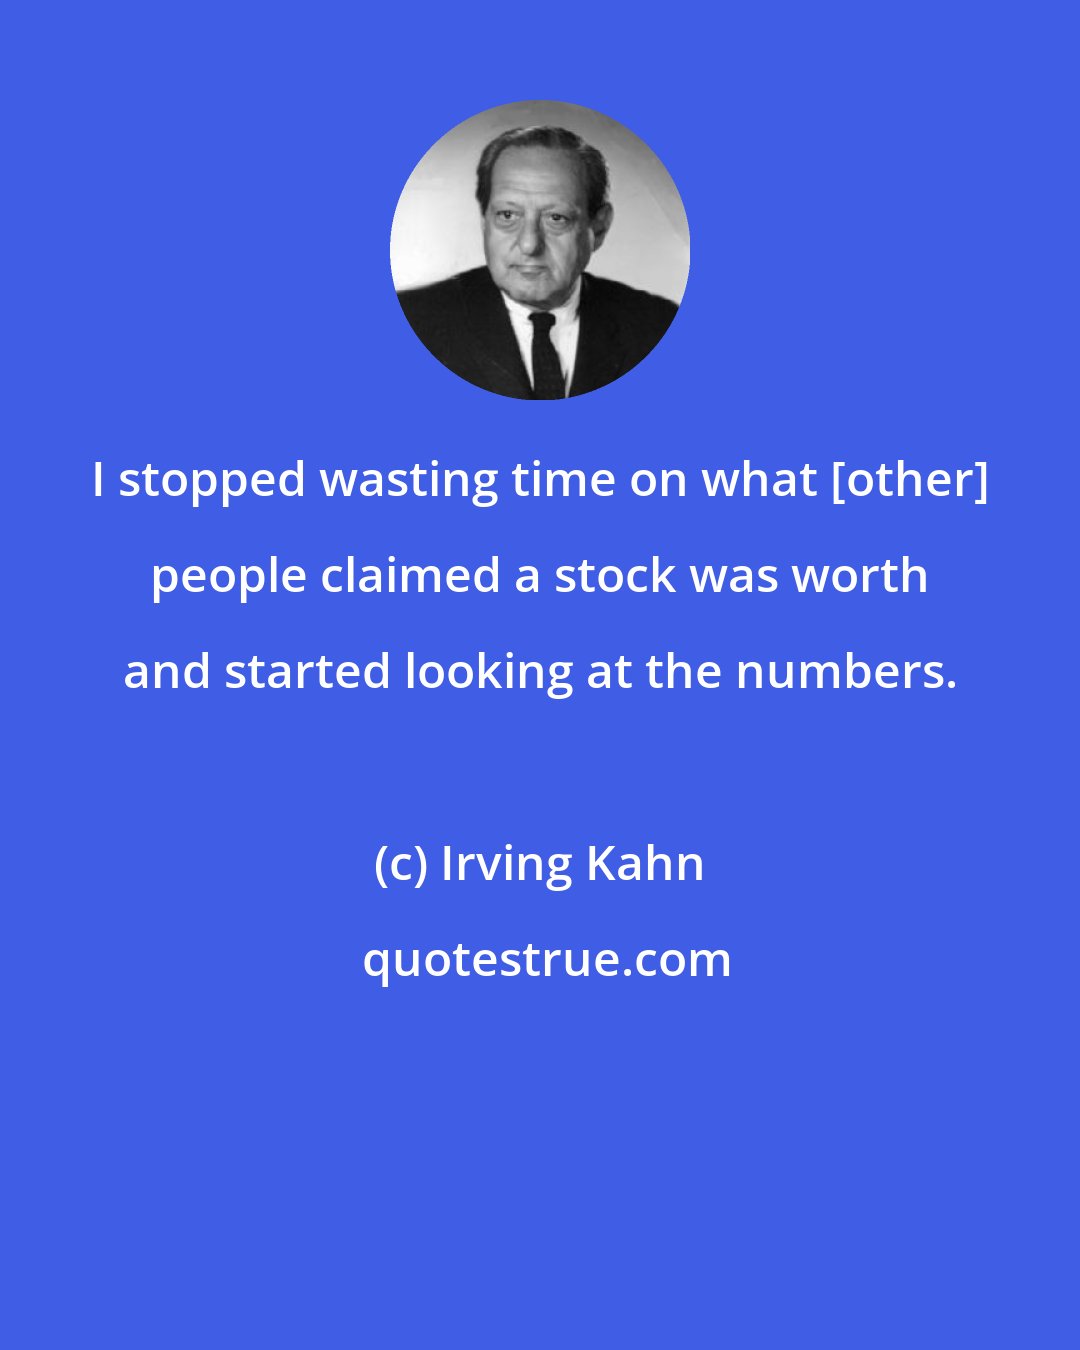 Irving Kahn: I stopped wasting time on what [other] people claimed a stock was worth and started looking at the numbers.